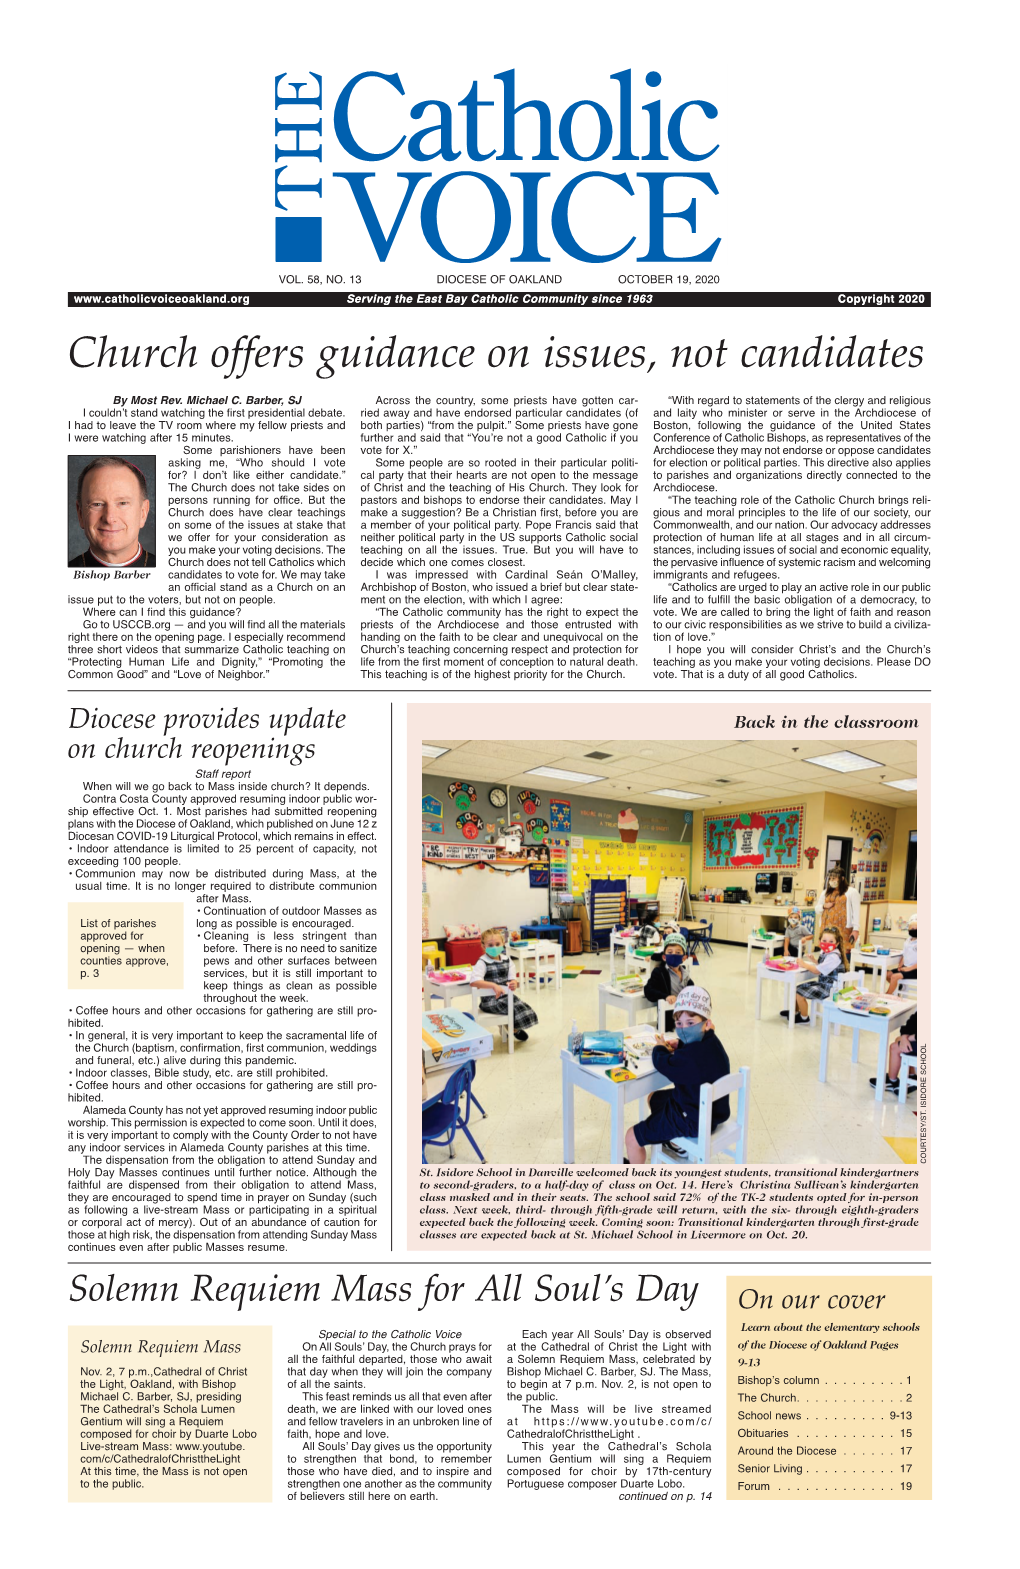 Church Offers Guidance on Issues, Not Candidates by Most Rev